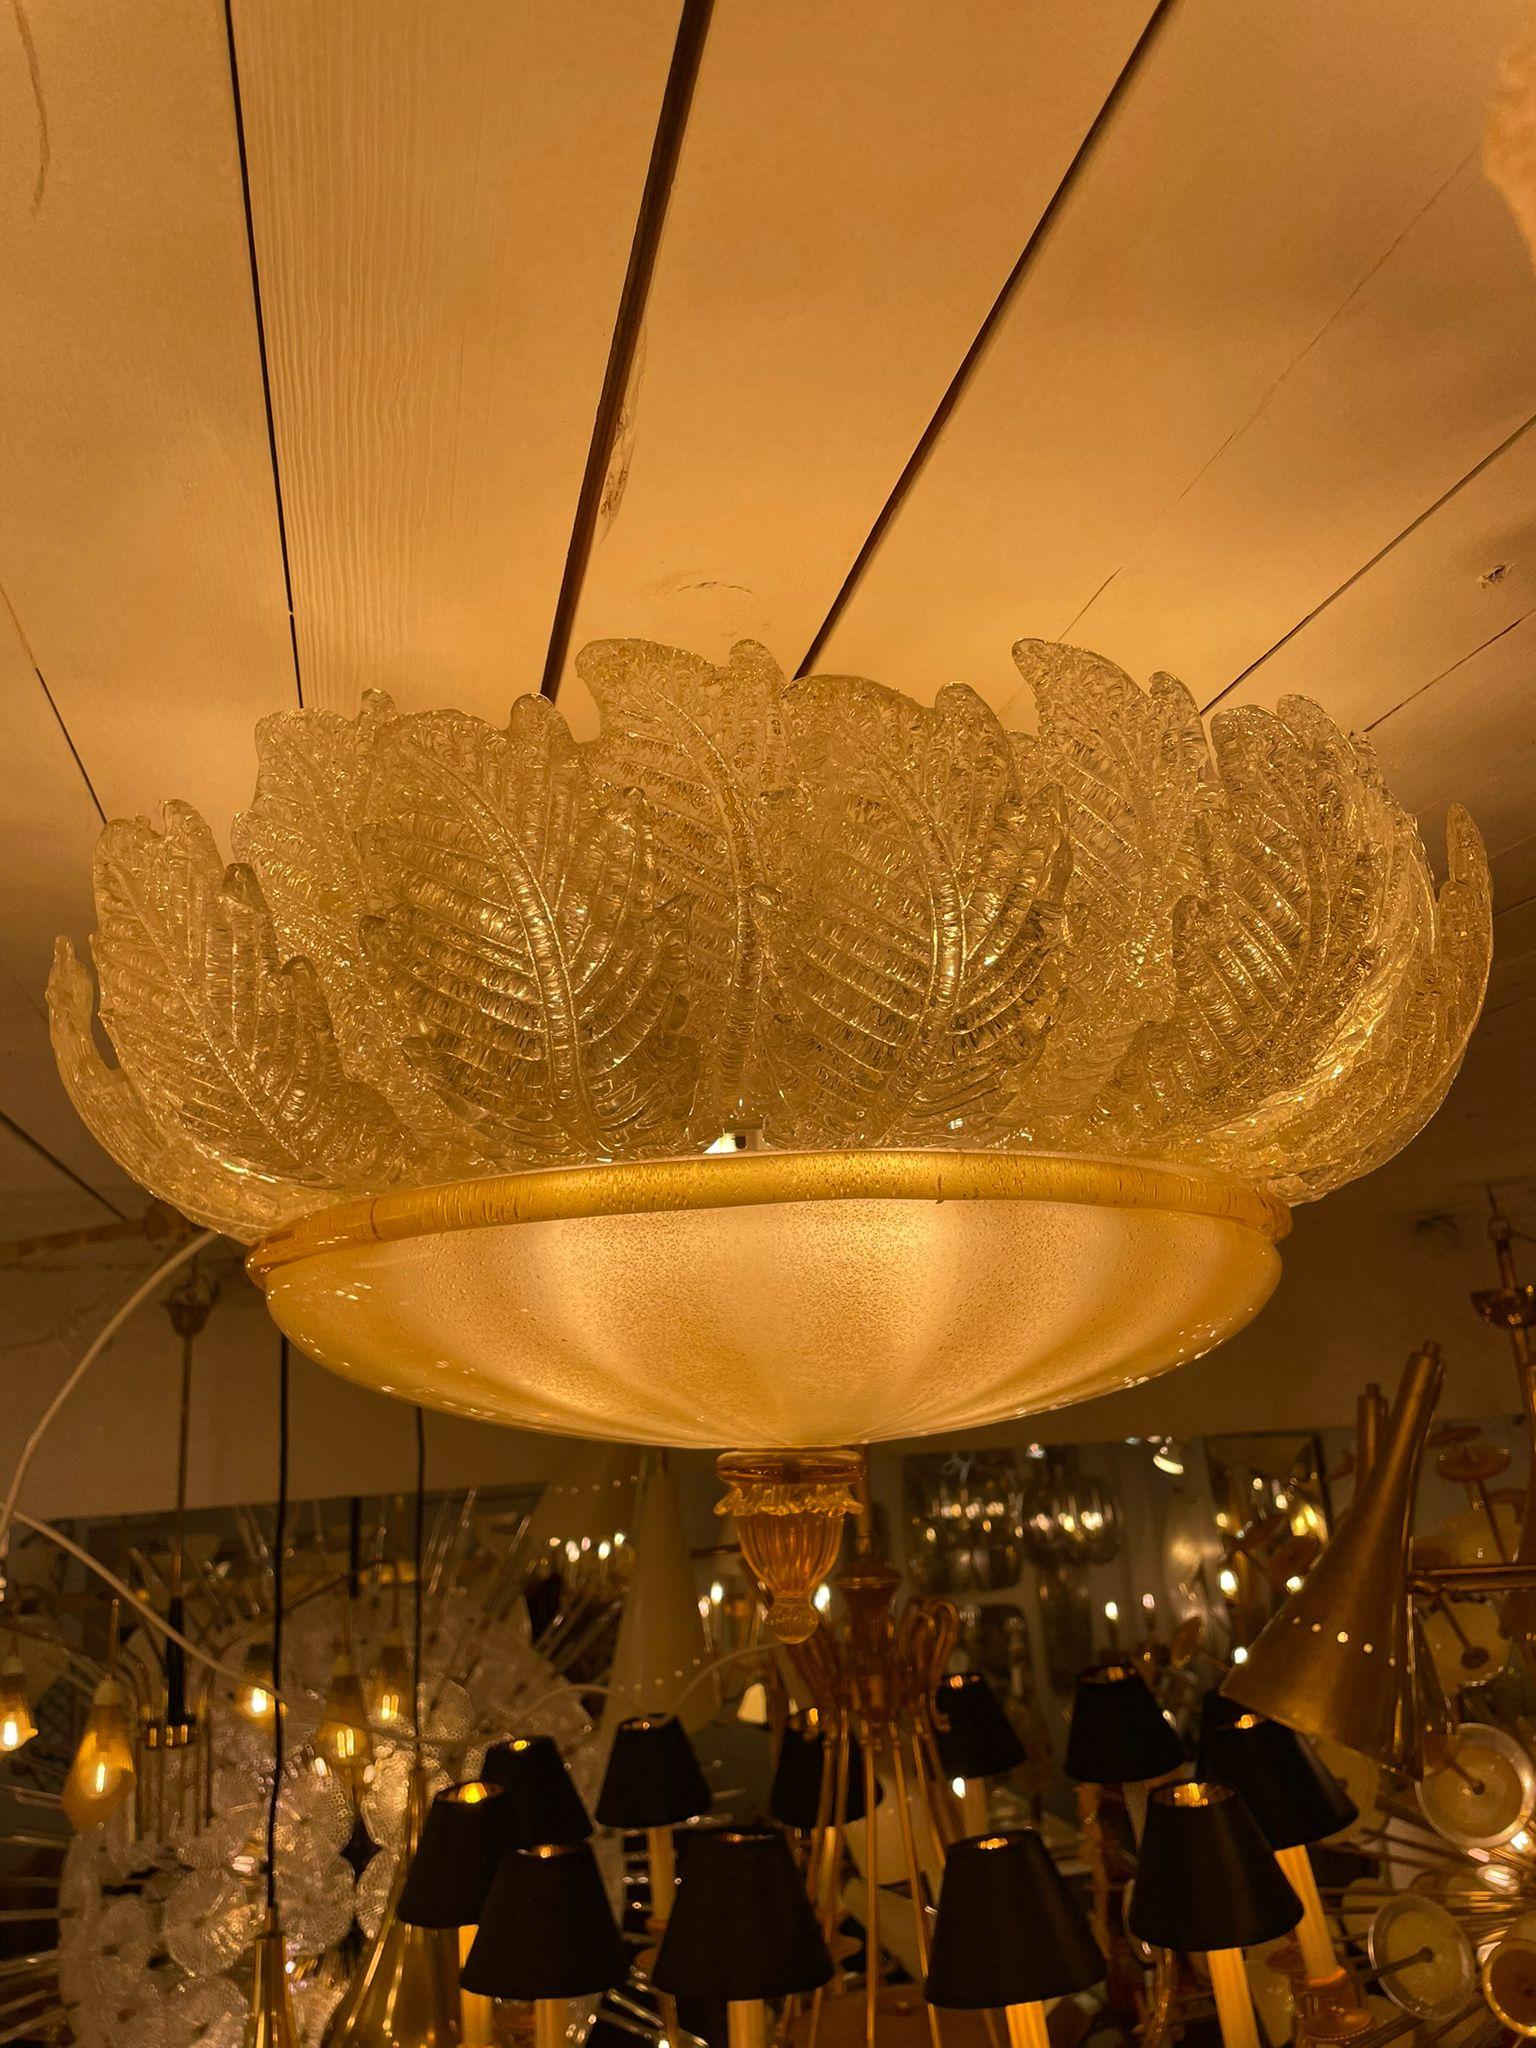 Mid-20th Century Barovier Ceiling Lamp with Gold Inclusion, Italy 1930s For Sale